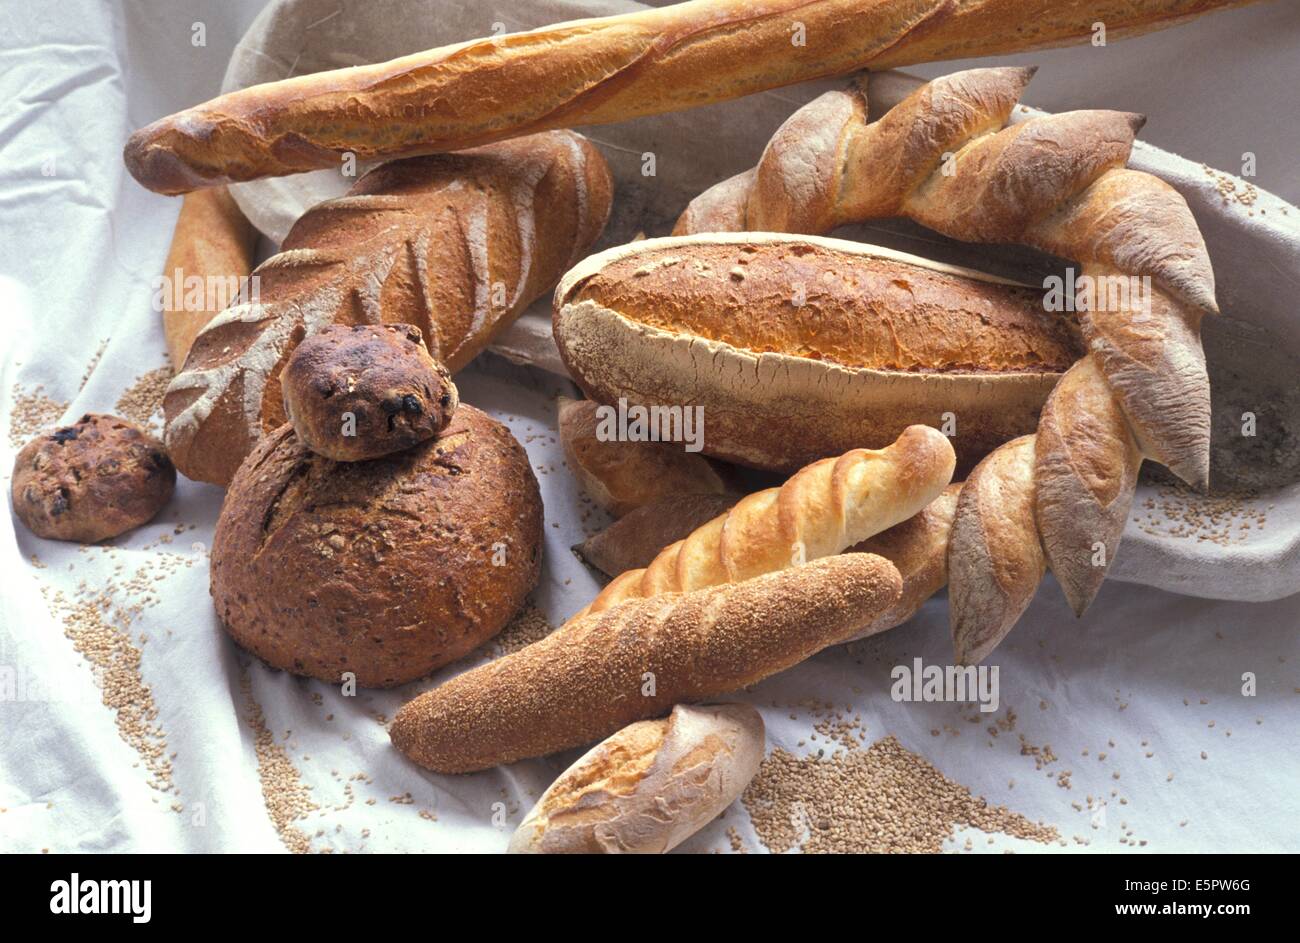 Still life of different kinds of French breads. Stock Photo